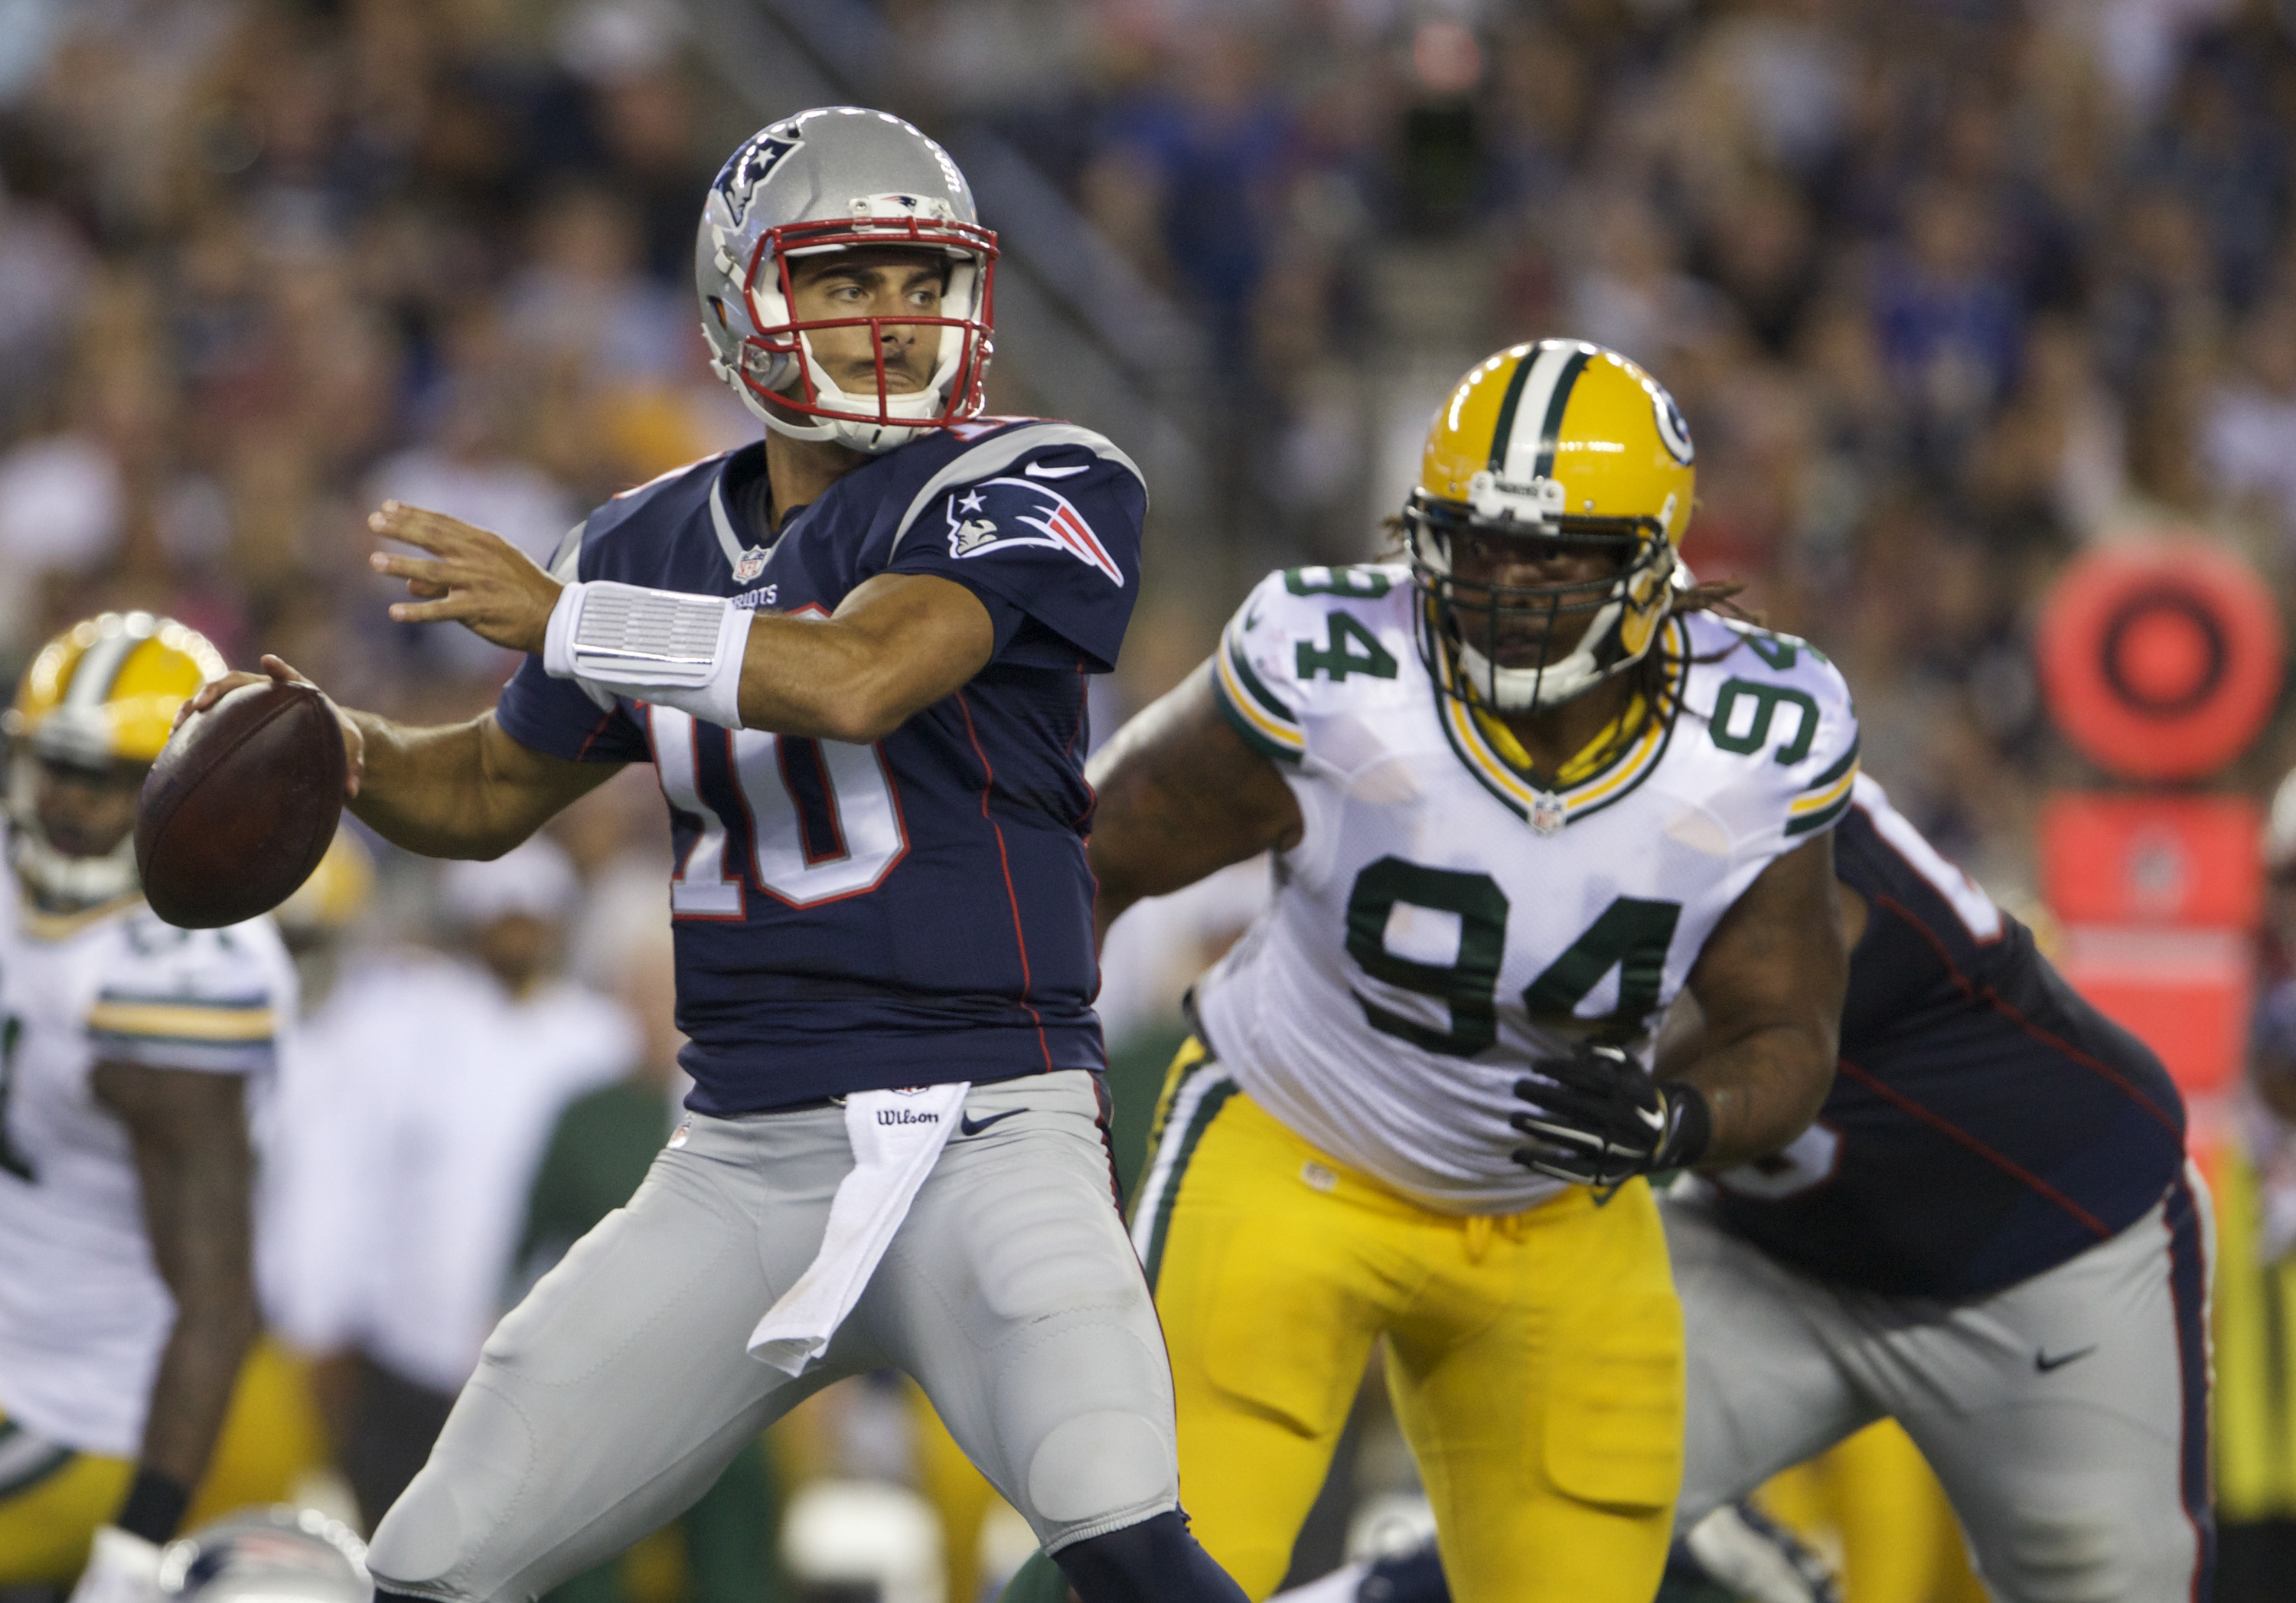 Aug 13, 2015; Foxborough, MA, USA; New England Patriots quarterback Jimmy Garoppolo (10) throws a pass during the second quarter against the Green Bay Packers in a preseason NFL football game at Gillette Stadium. Mandatory Credit: David Butler II-USA TODAY Sports ORG XMIT: USATSI-224982 ORIG FILE ID: 20150813_krj_sv3_0101.JPG